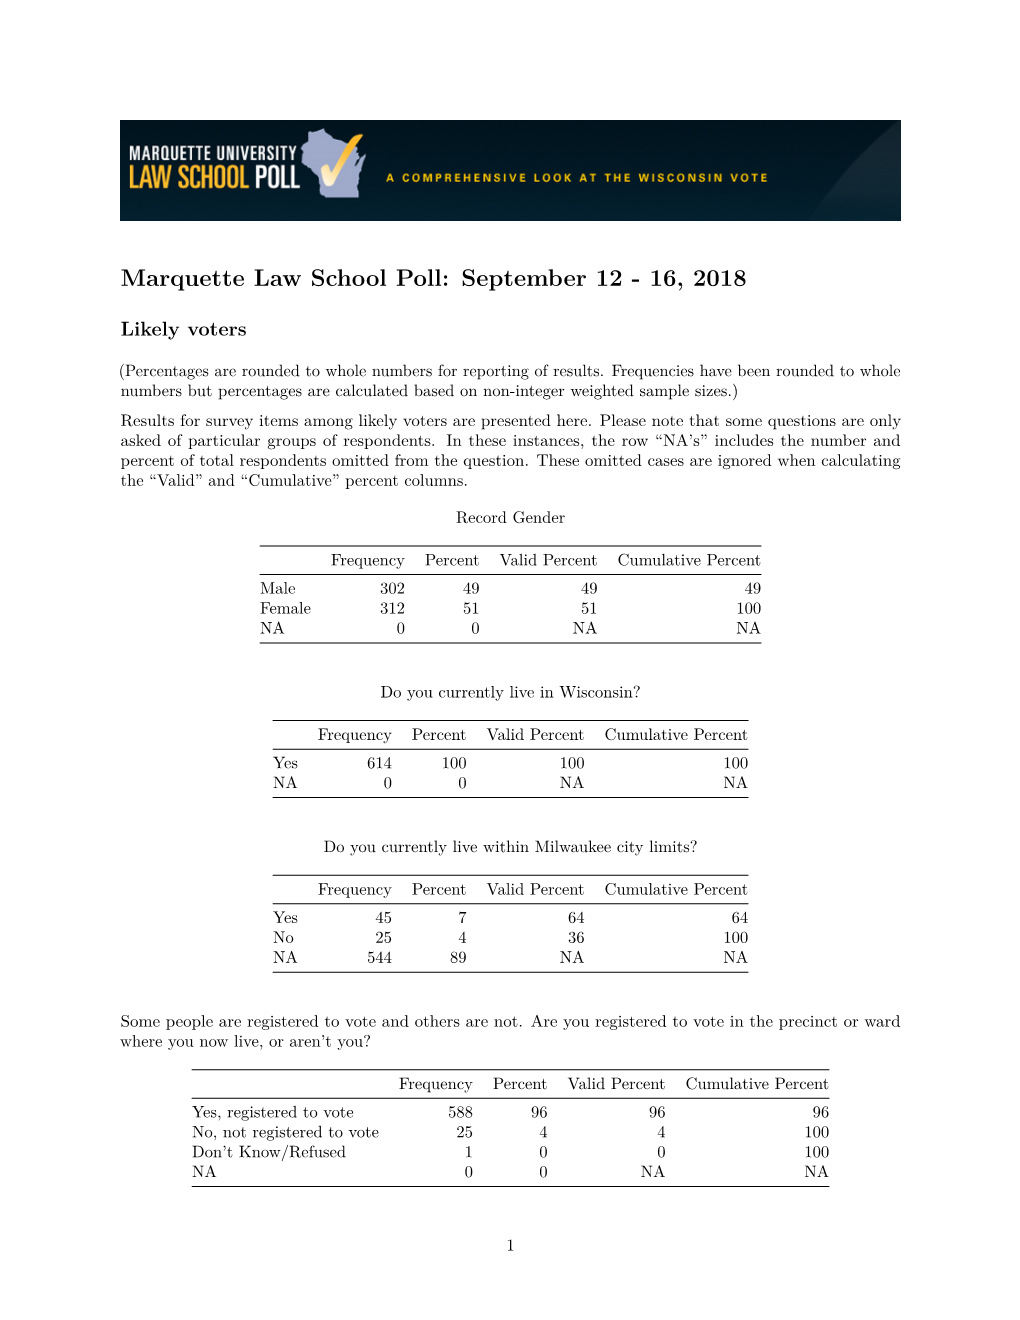 Marquette Law School Poll, September 12-16, 2018 Topline Results for Likely Voters